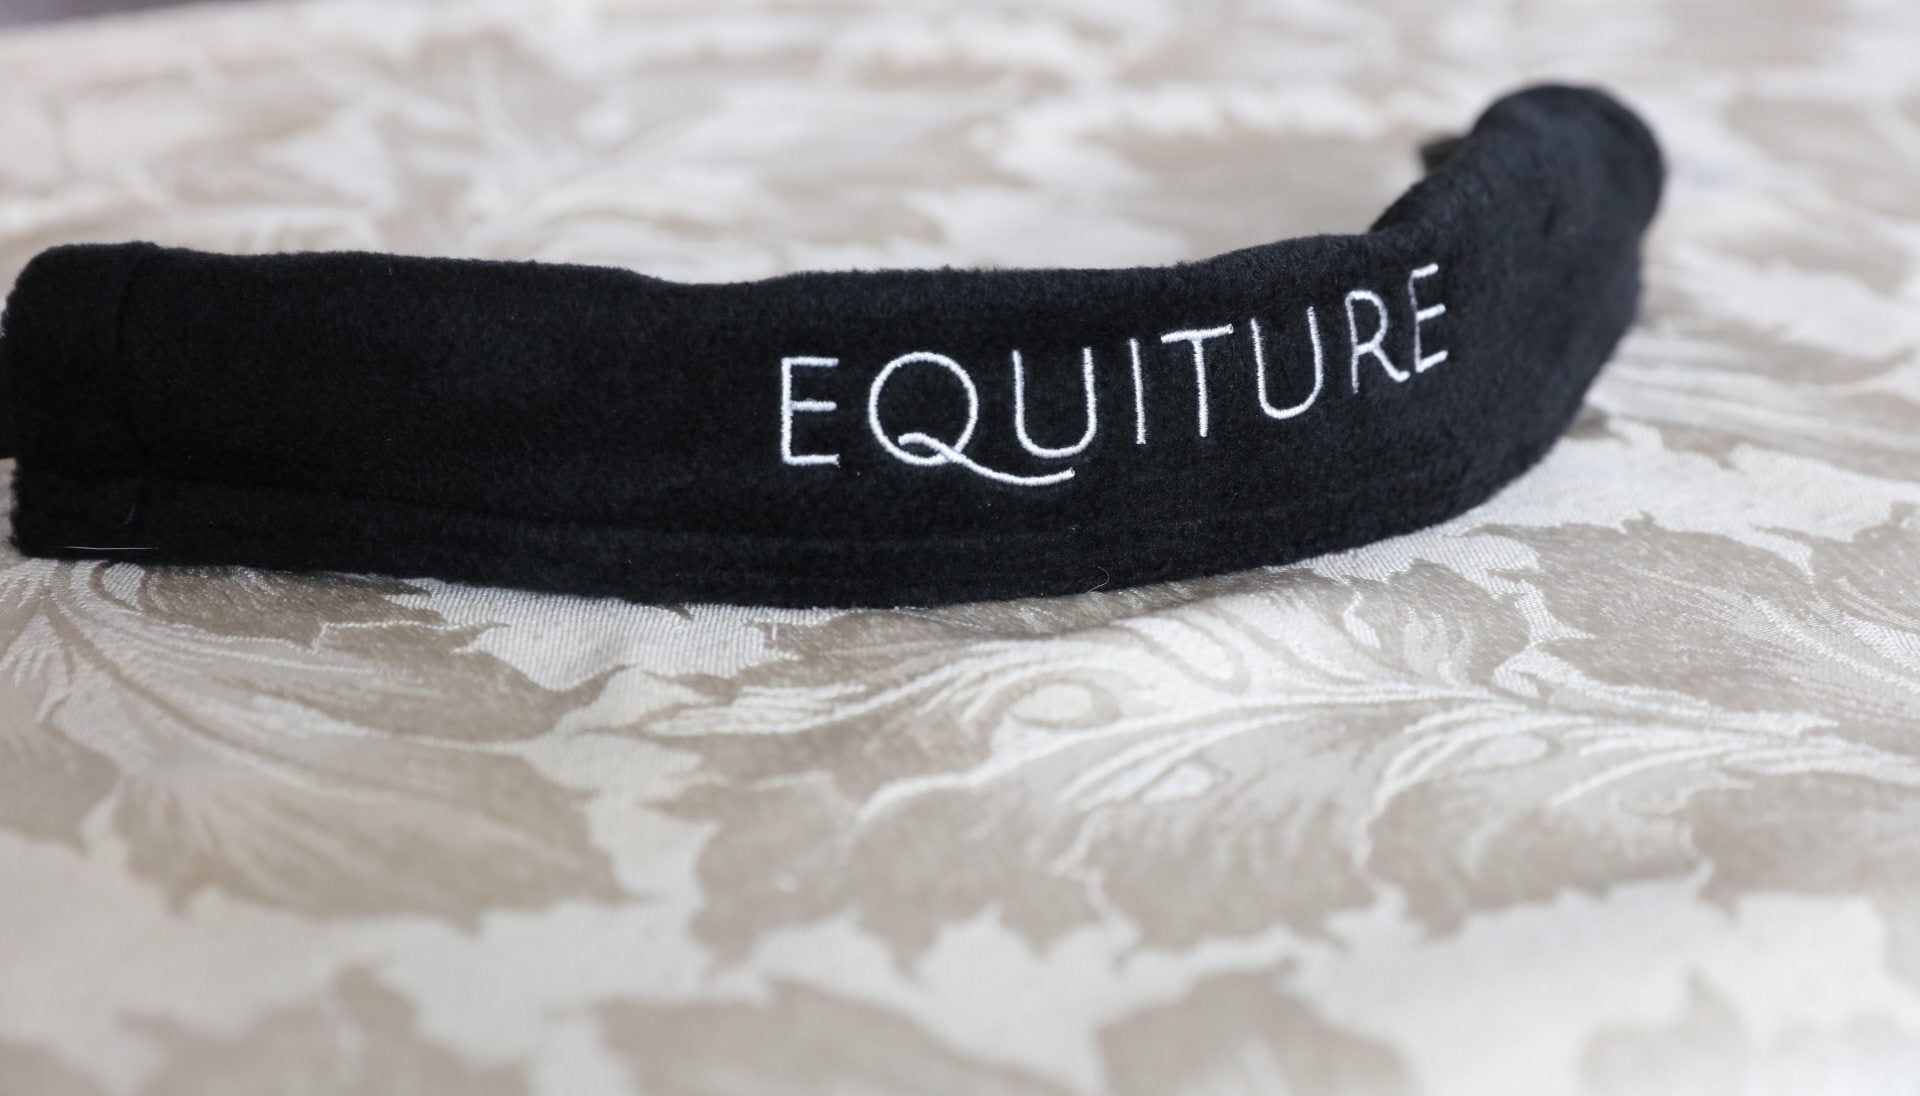 Equiture Emerald and montana browband